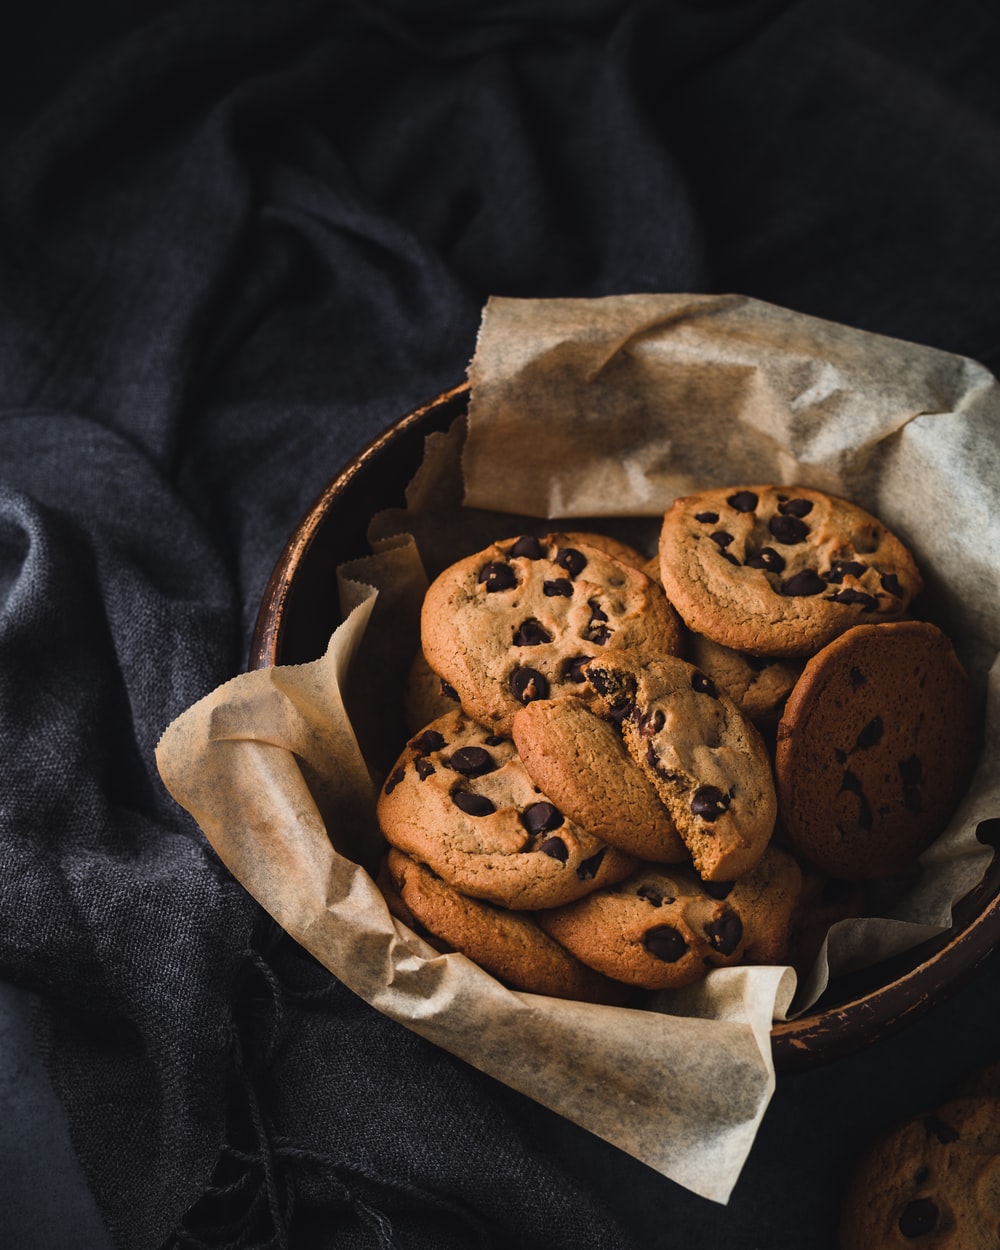 Cookie Picture. Download Free Image